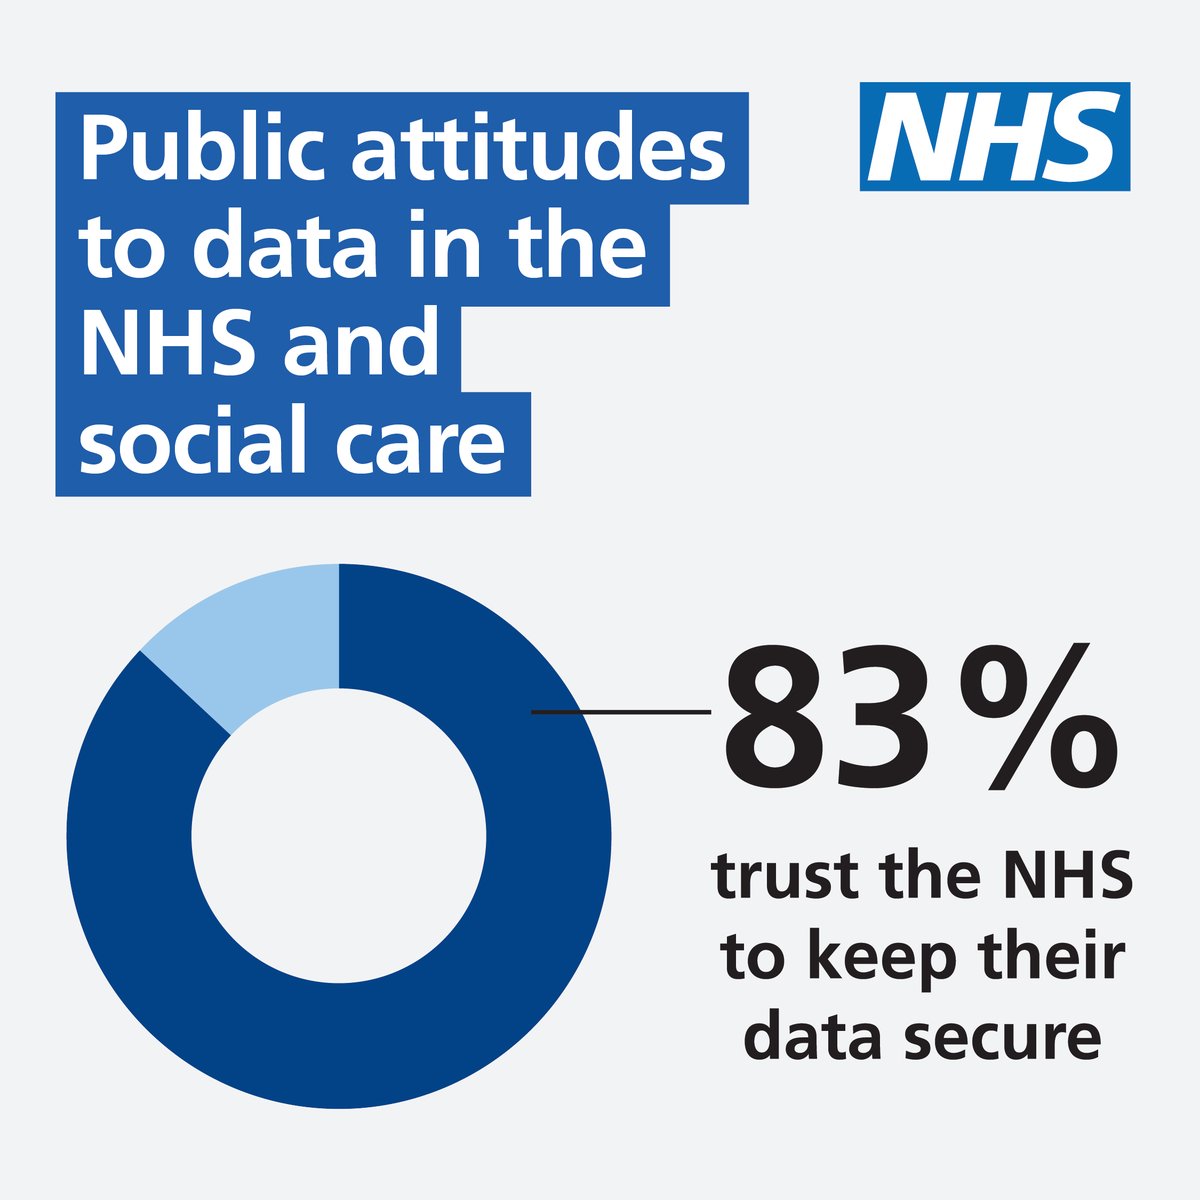 How comfortable are people with the NHS using patient data for research, planning and improving care? 

Our new report breaks down public attitudes and knowledge on health and care data use 👉 digital.nhs.uk/data-and-infor…

#datasaveslives #ResearchPoweredByData